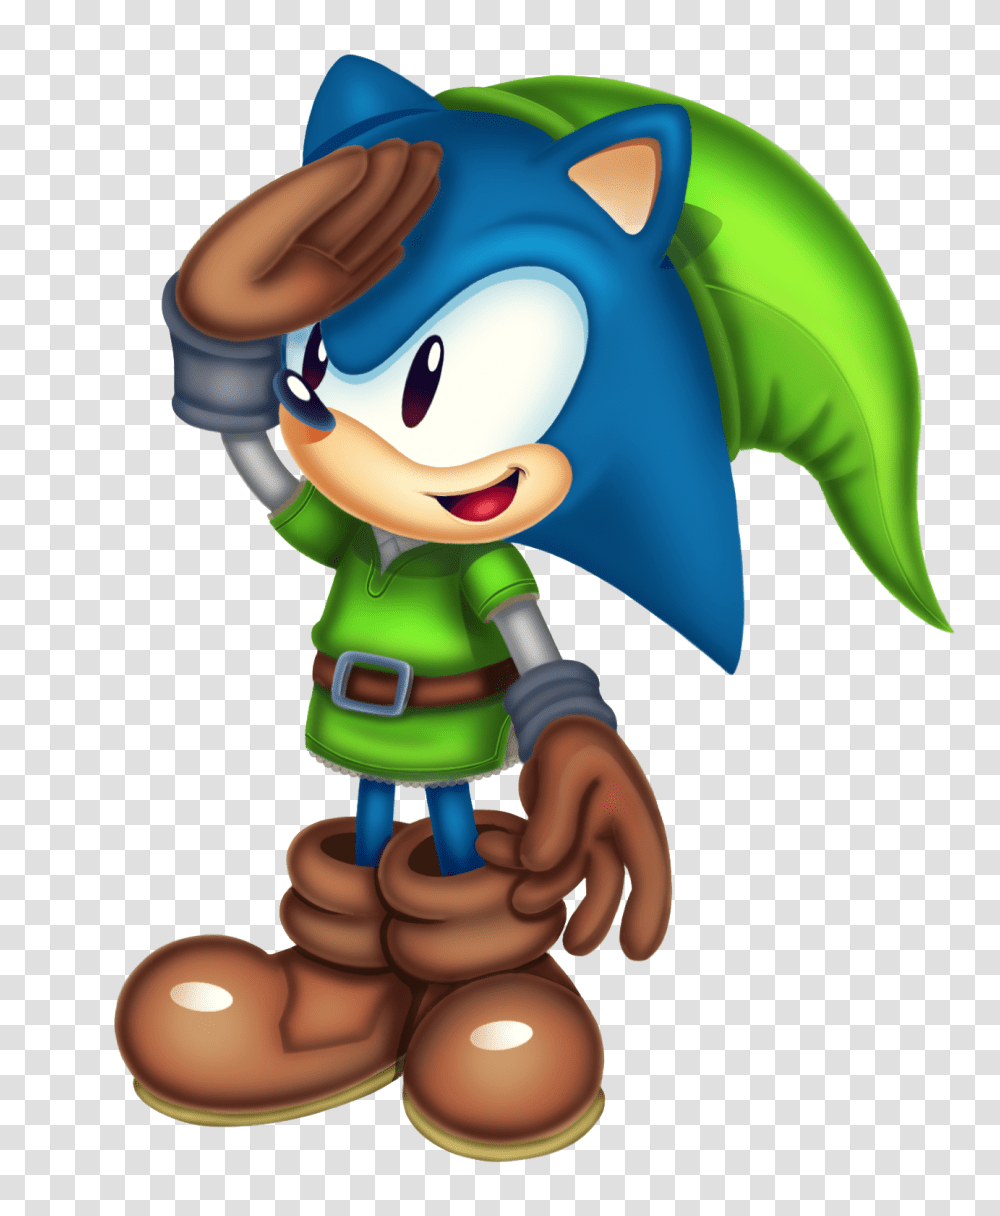 Download Clarissa Dressed Link Sonic Image Sonic The Hedgehog Link, Toy, Elf, Green, Sweets Transparent Png